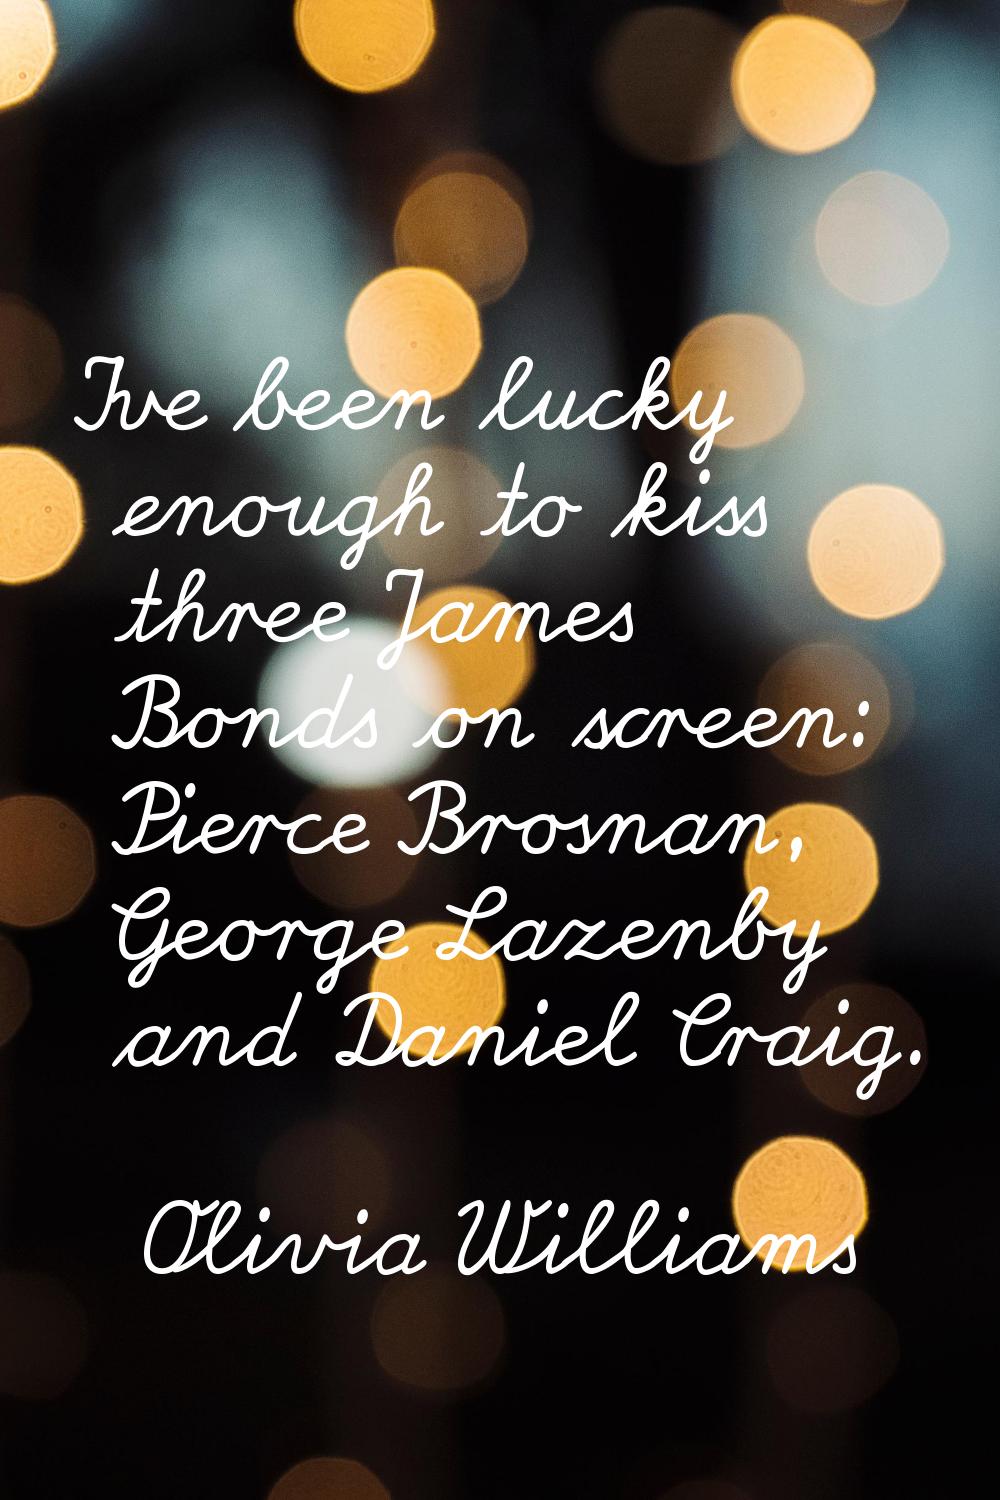 I've been lucky enough to kiss three James Bonds on screen: Pierce Brosnan, George Lazenby and Dani